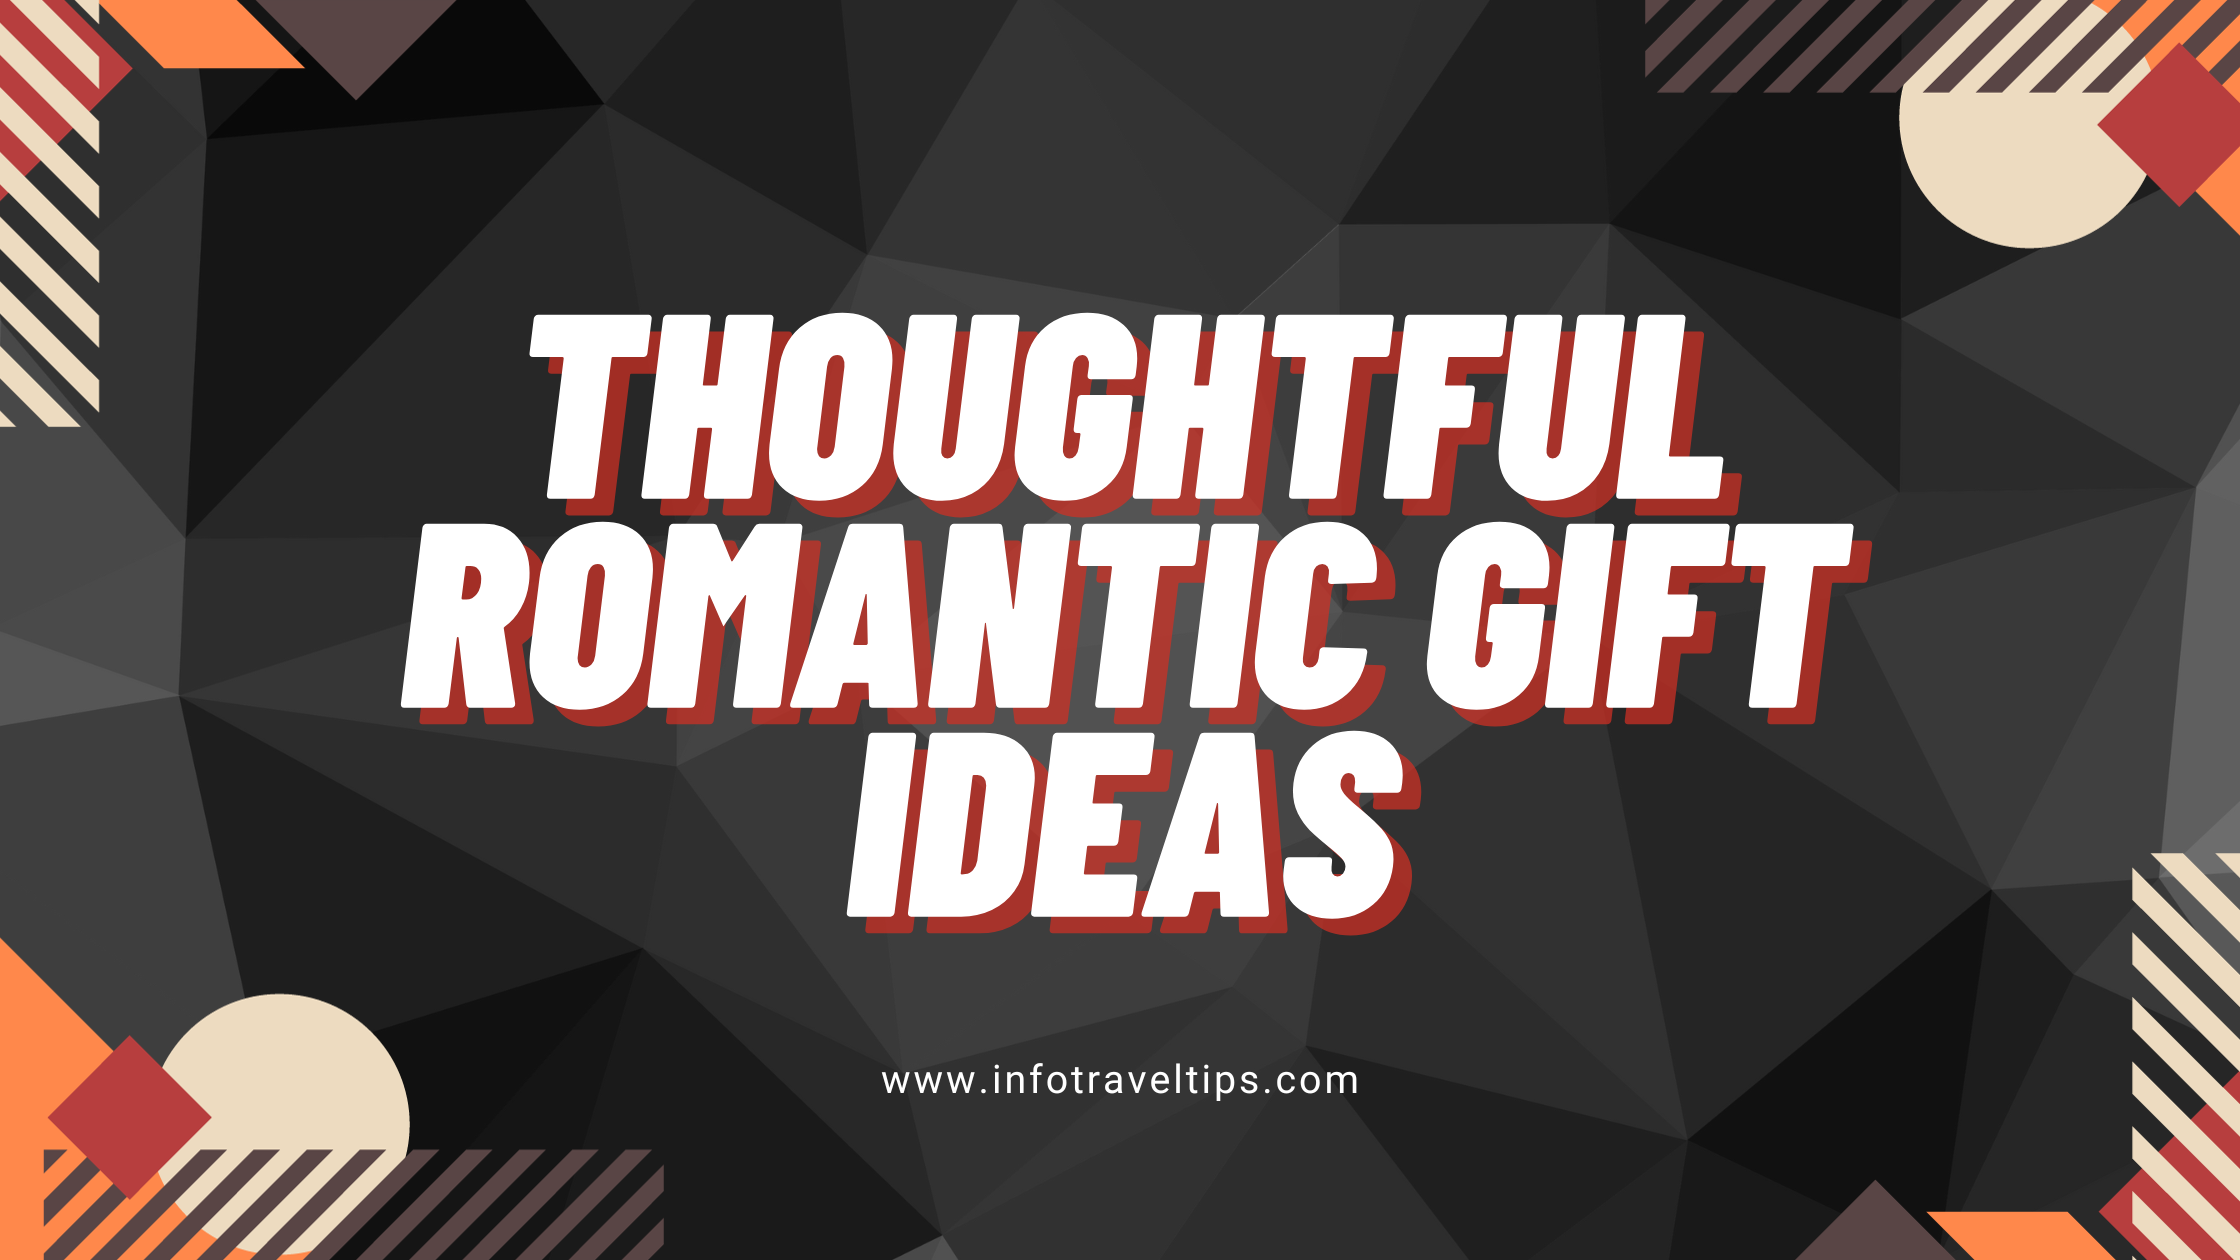 Thoughtful Romantic Gift Ideas For Your Significant Other